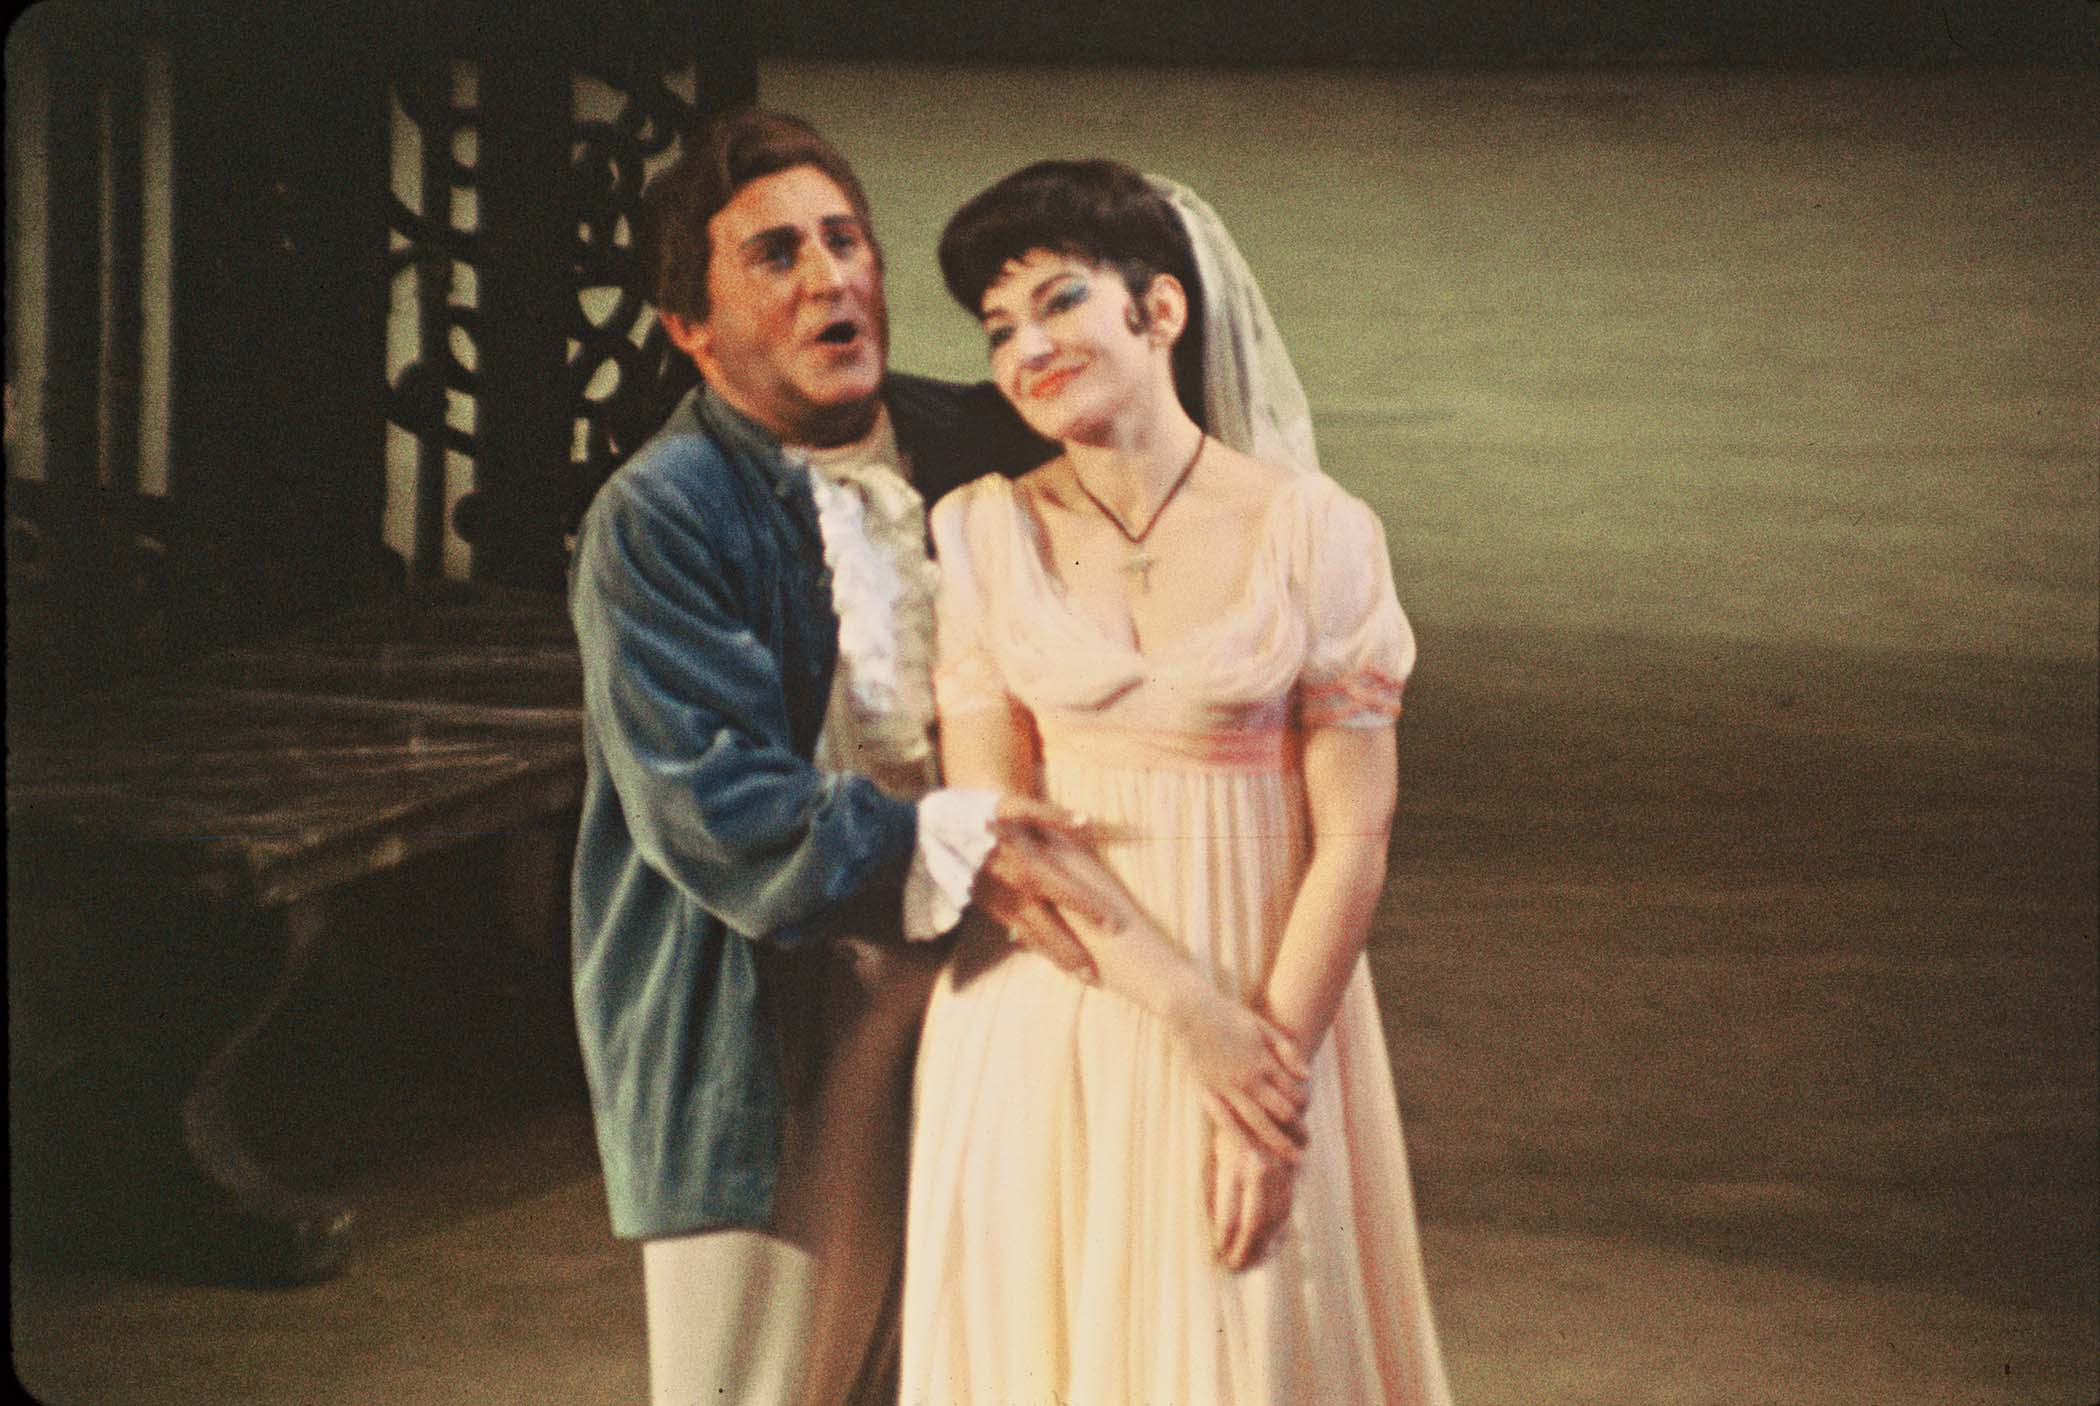 04.00Tosca_Tucker, Richard_Tosca Act I 1965_Cavaradossi_with Maira Callas in title role.jpg